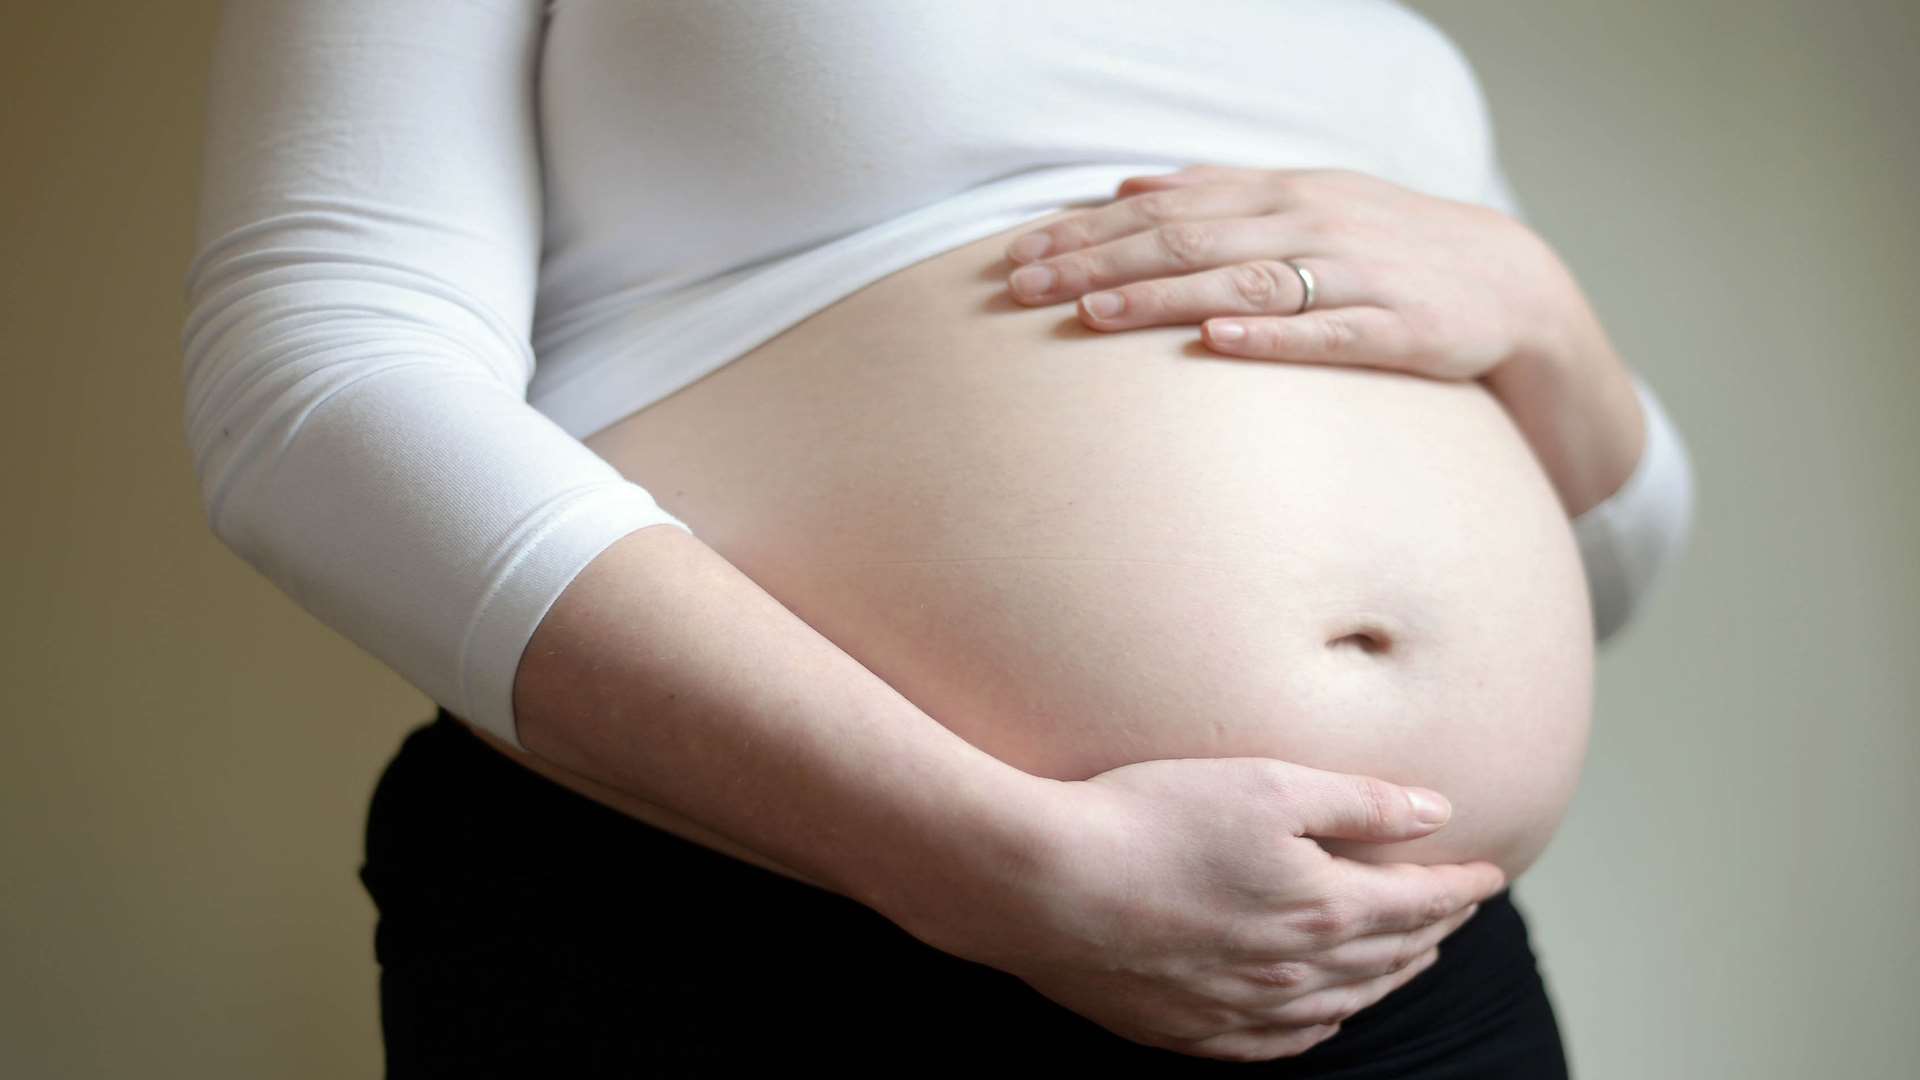 Some 36% of mums plan the type of birth they want even before becoming pregnant